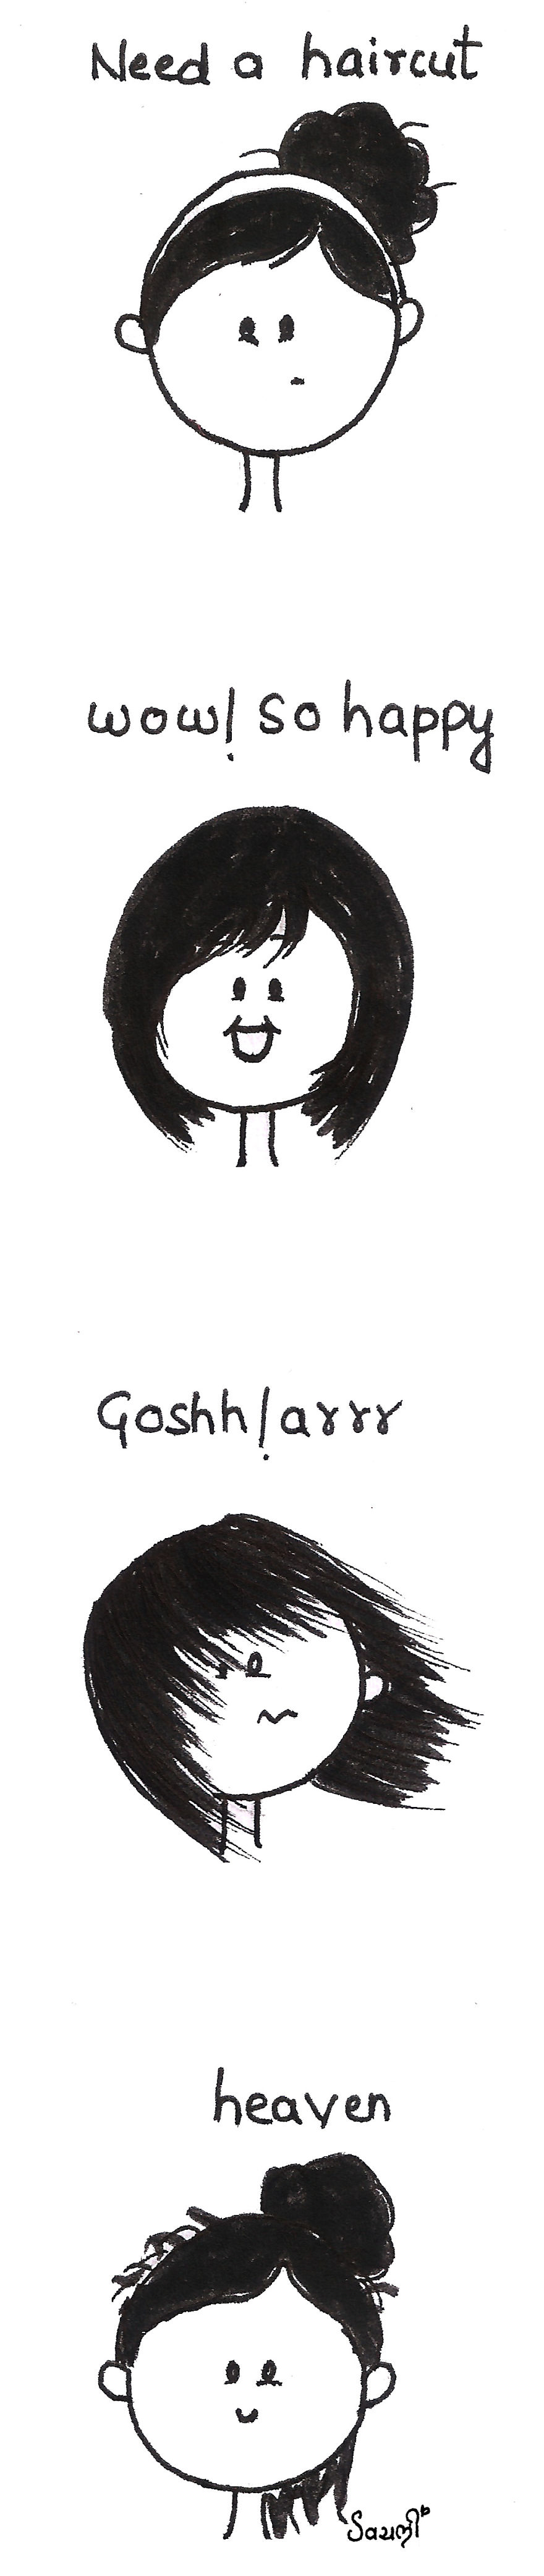 I Drew Illustrations About Being A Girlish Tomboy